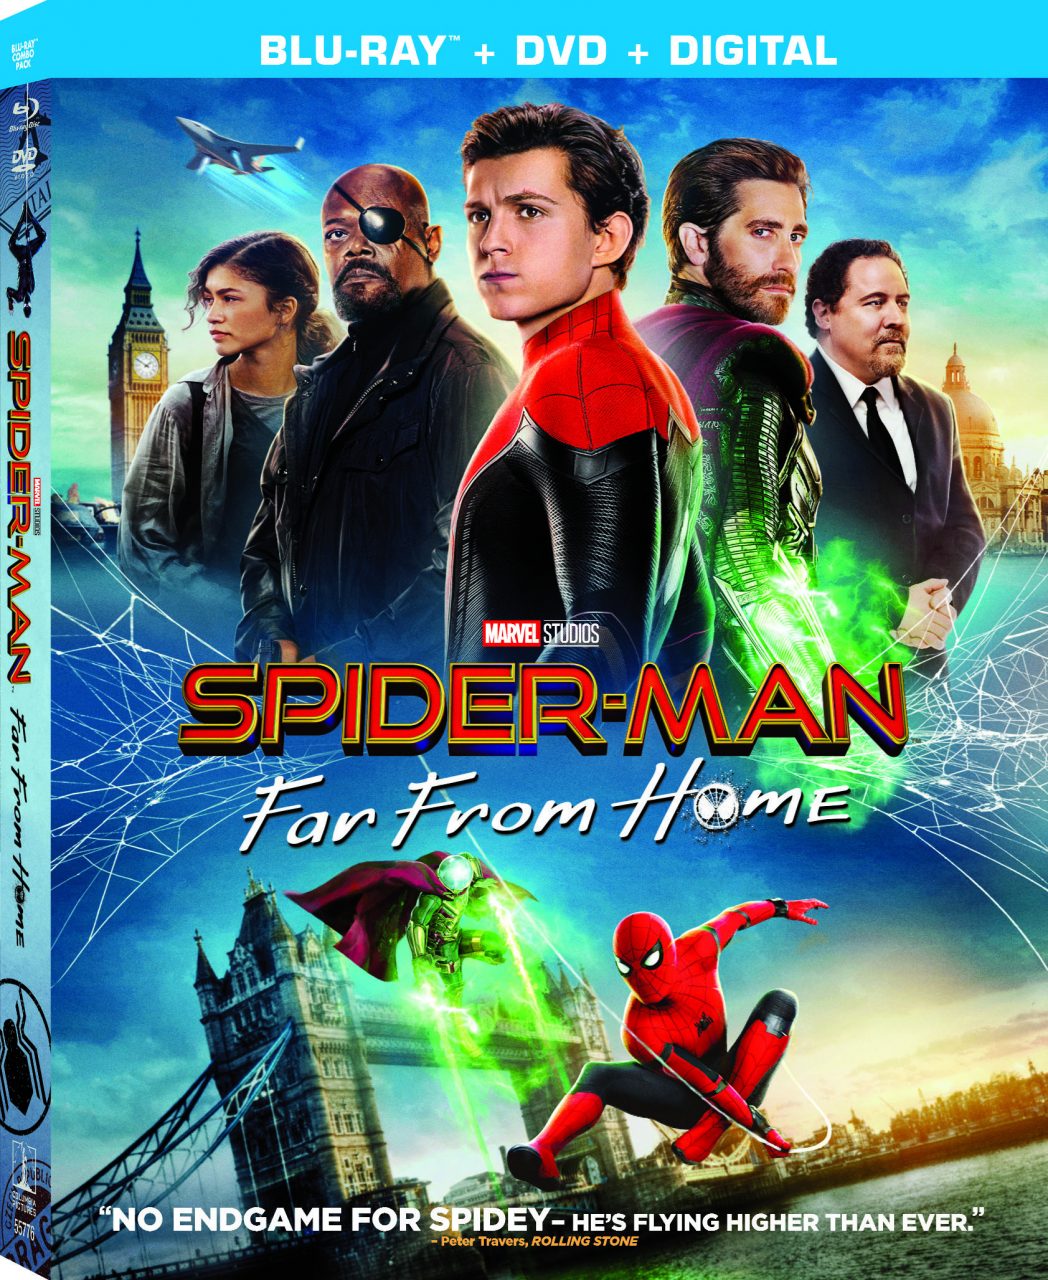 Spider-Man: Far From Home Blu-Ray Combo Pack cover (Sony Pictures Home Entertainment)